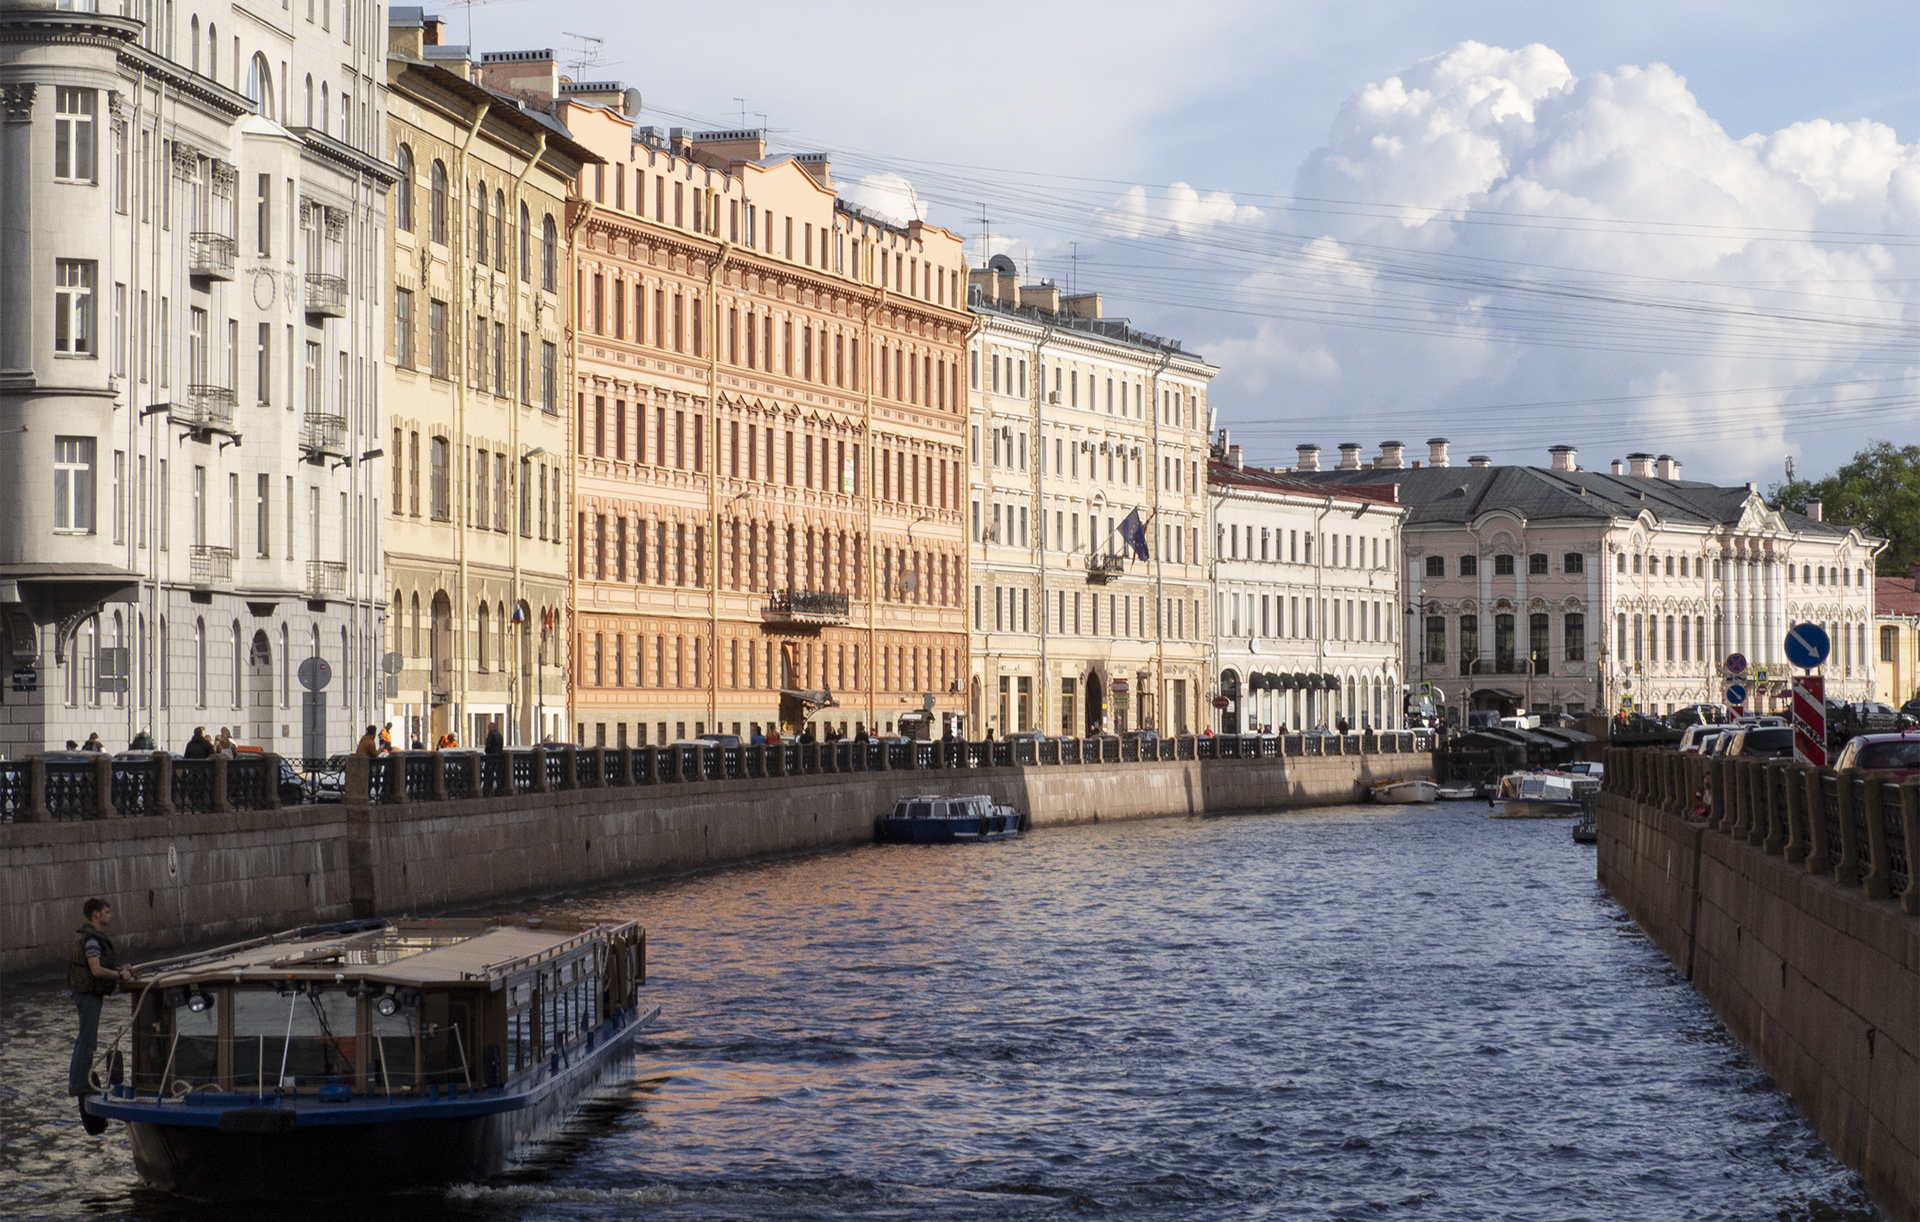 Explore St. Petersburg by boat along the hundreds of canals and tributaries in the city. This is best way to see the palaces of St. Petersburg.